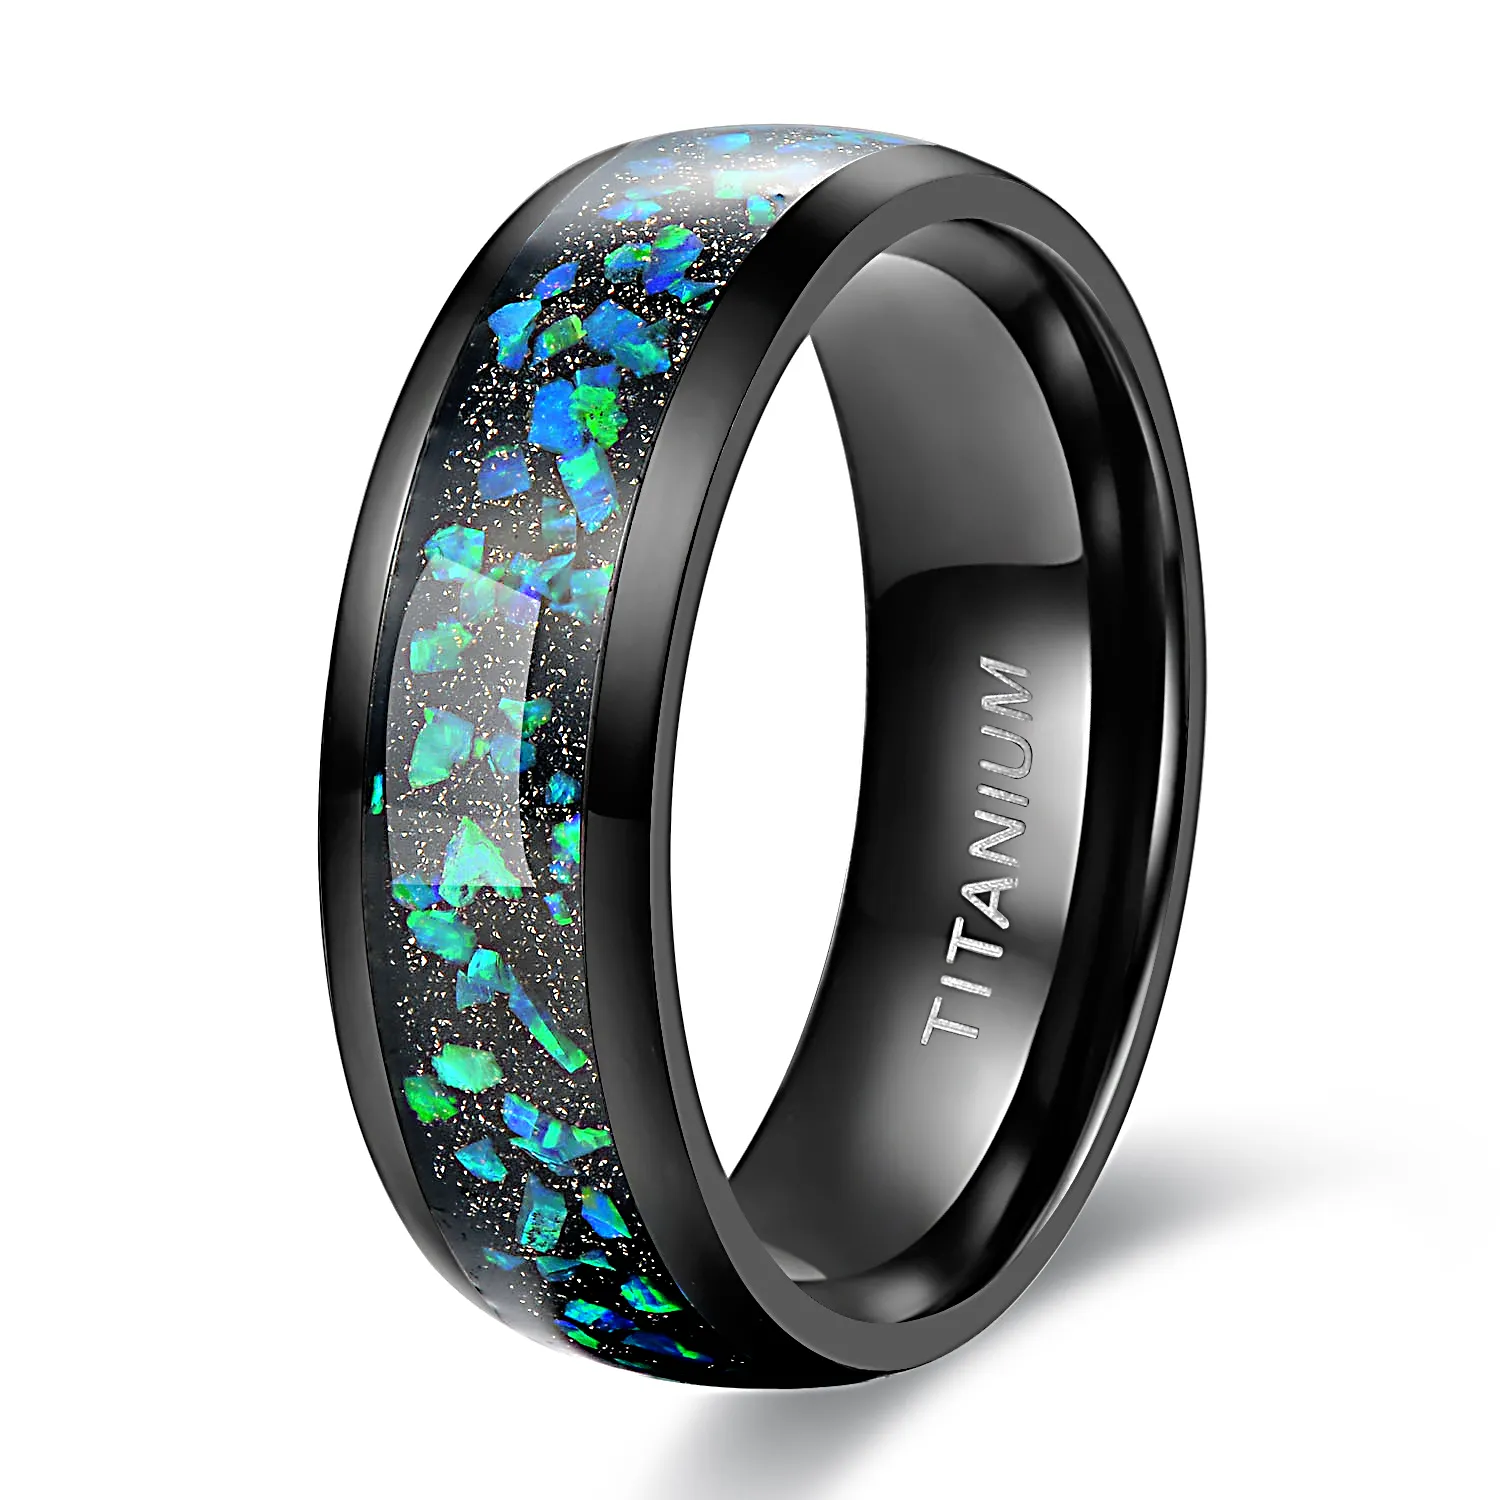 Somen 8mm Black Titanium Ring with Opal Inlay for Men Women Dome Polished Engagement Wedding Ring Size 6-13 Dropshipping